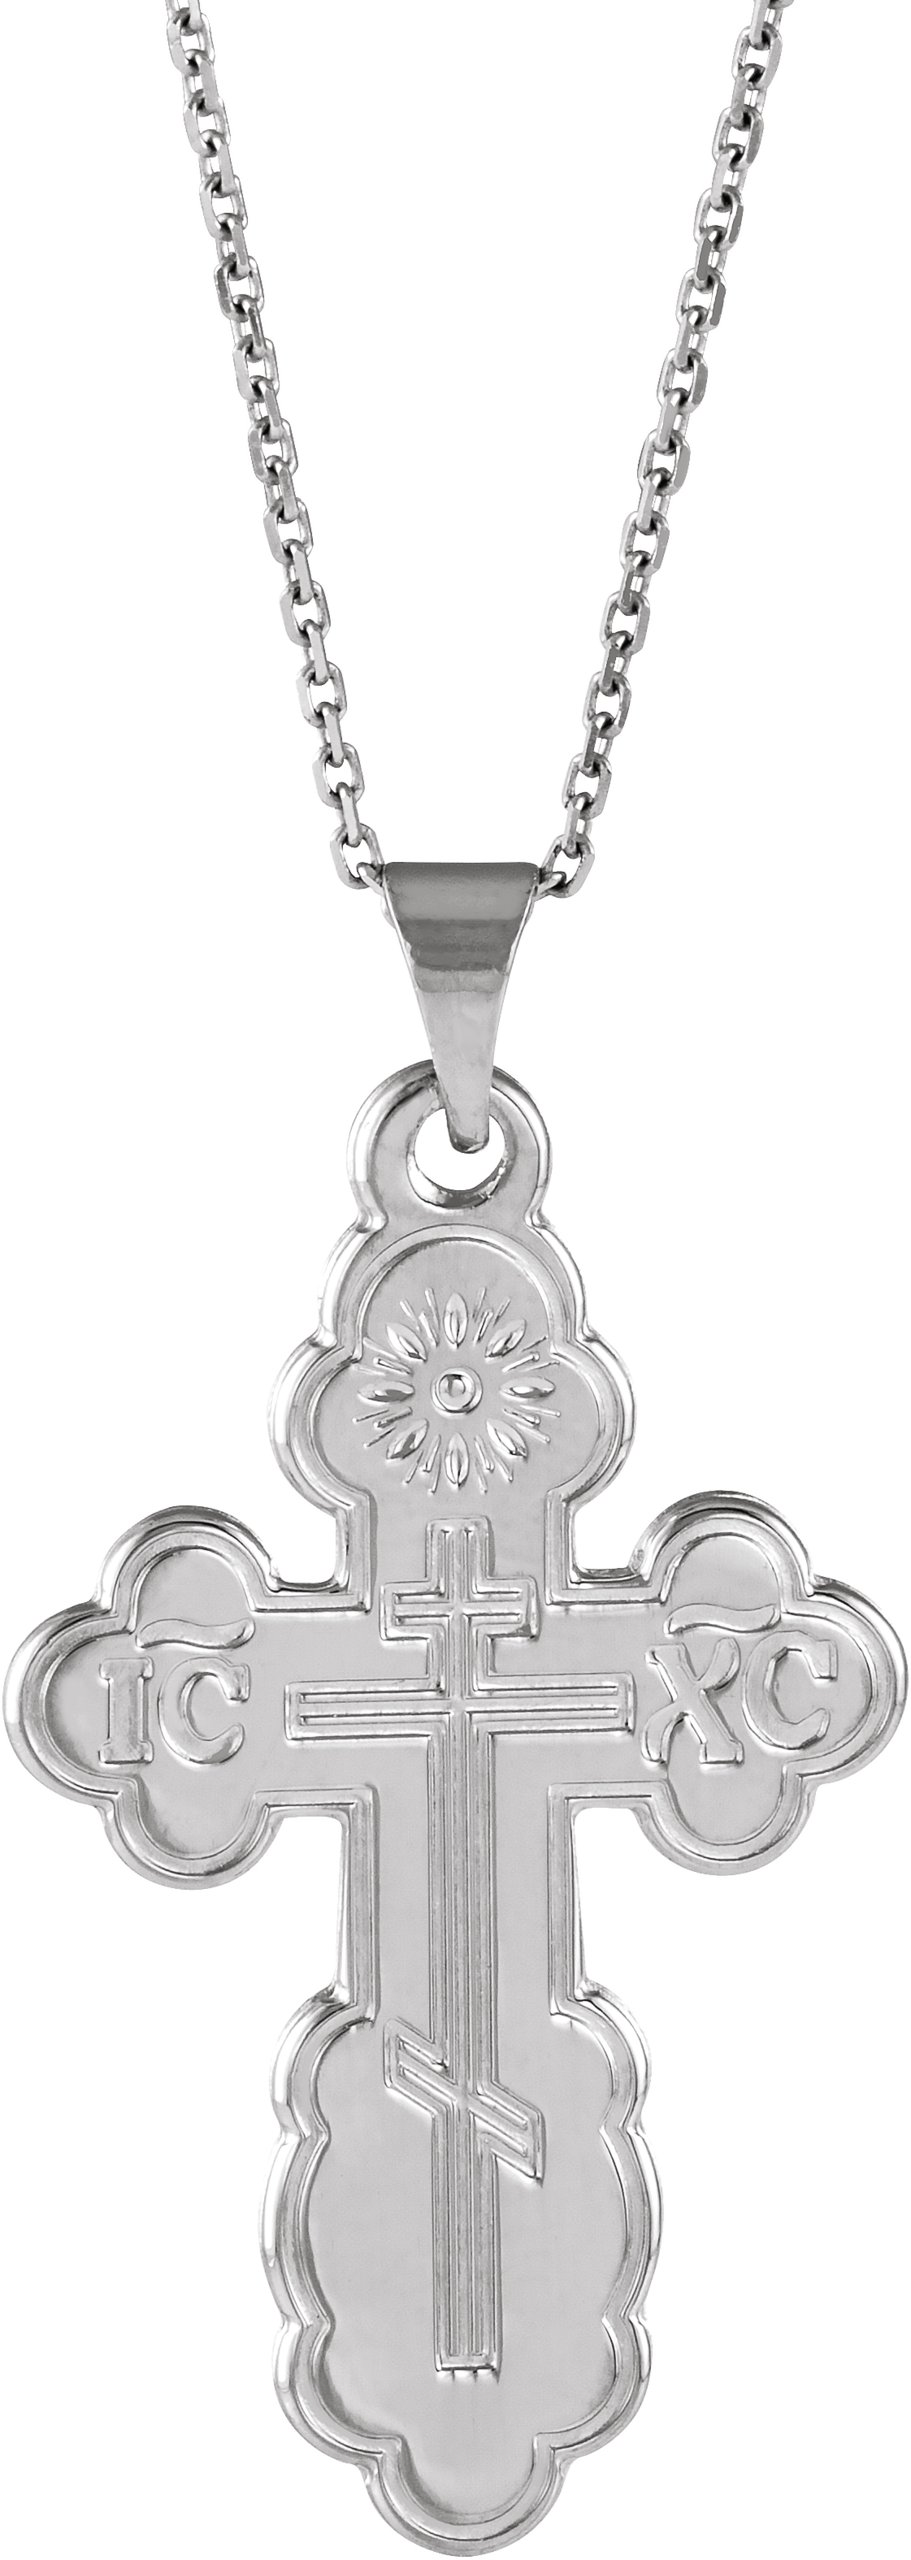 Sterling Silver 32x21 mm Orthodox Cross 24" Necklace